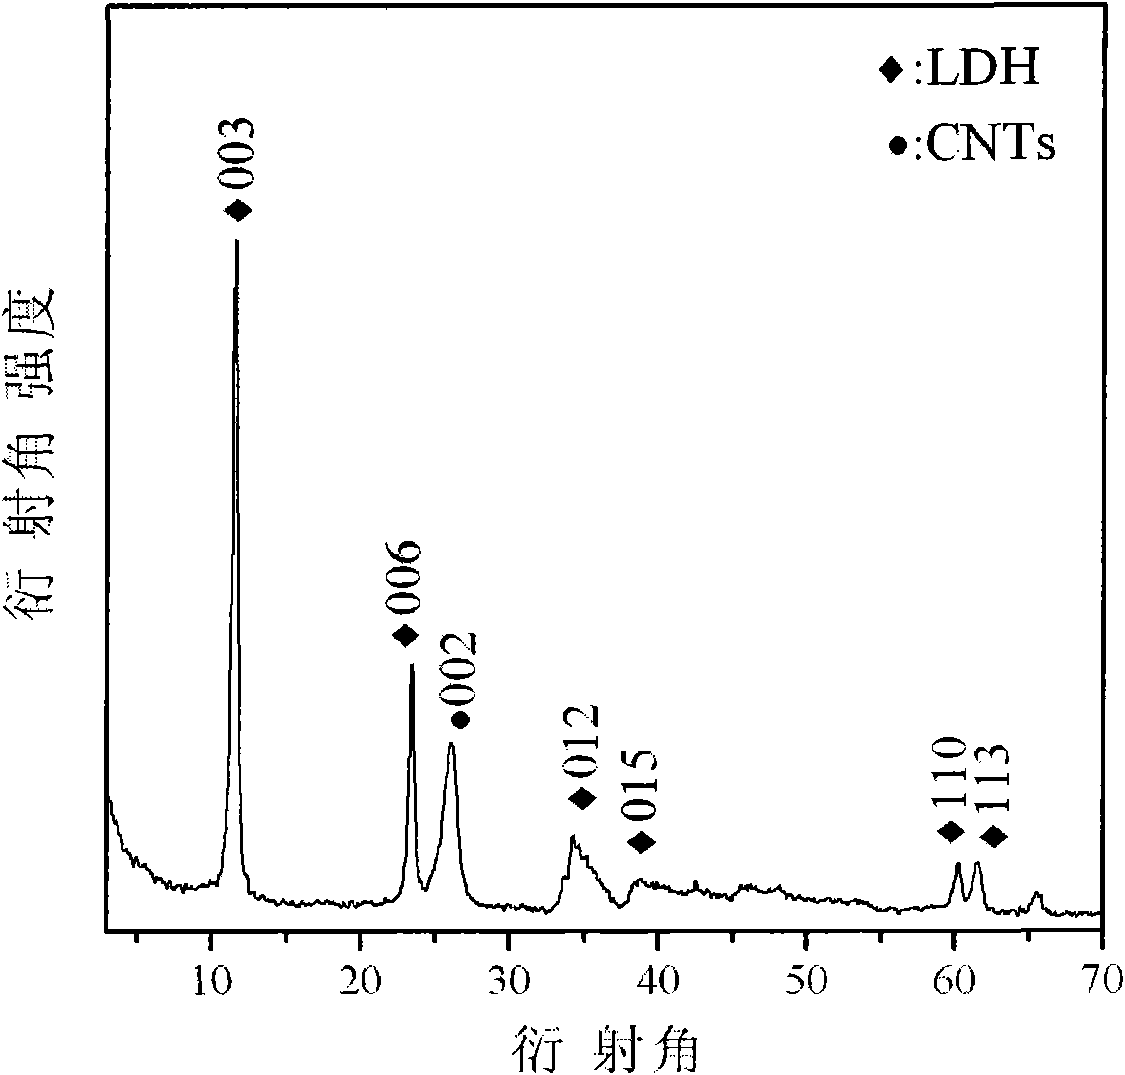 CoAl-metallic oxide/carbon nano tube composite as well as preparation method and application thereof as ammonium porchlorate catalyst